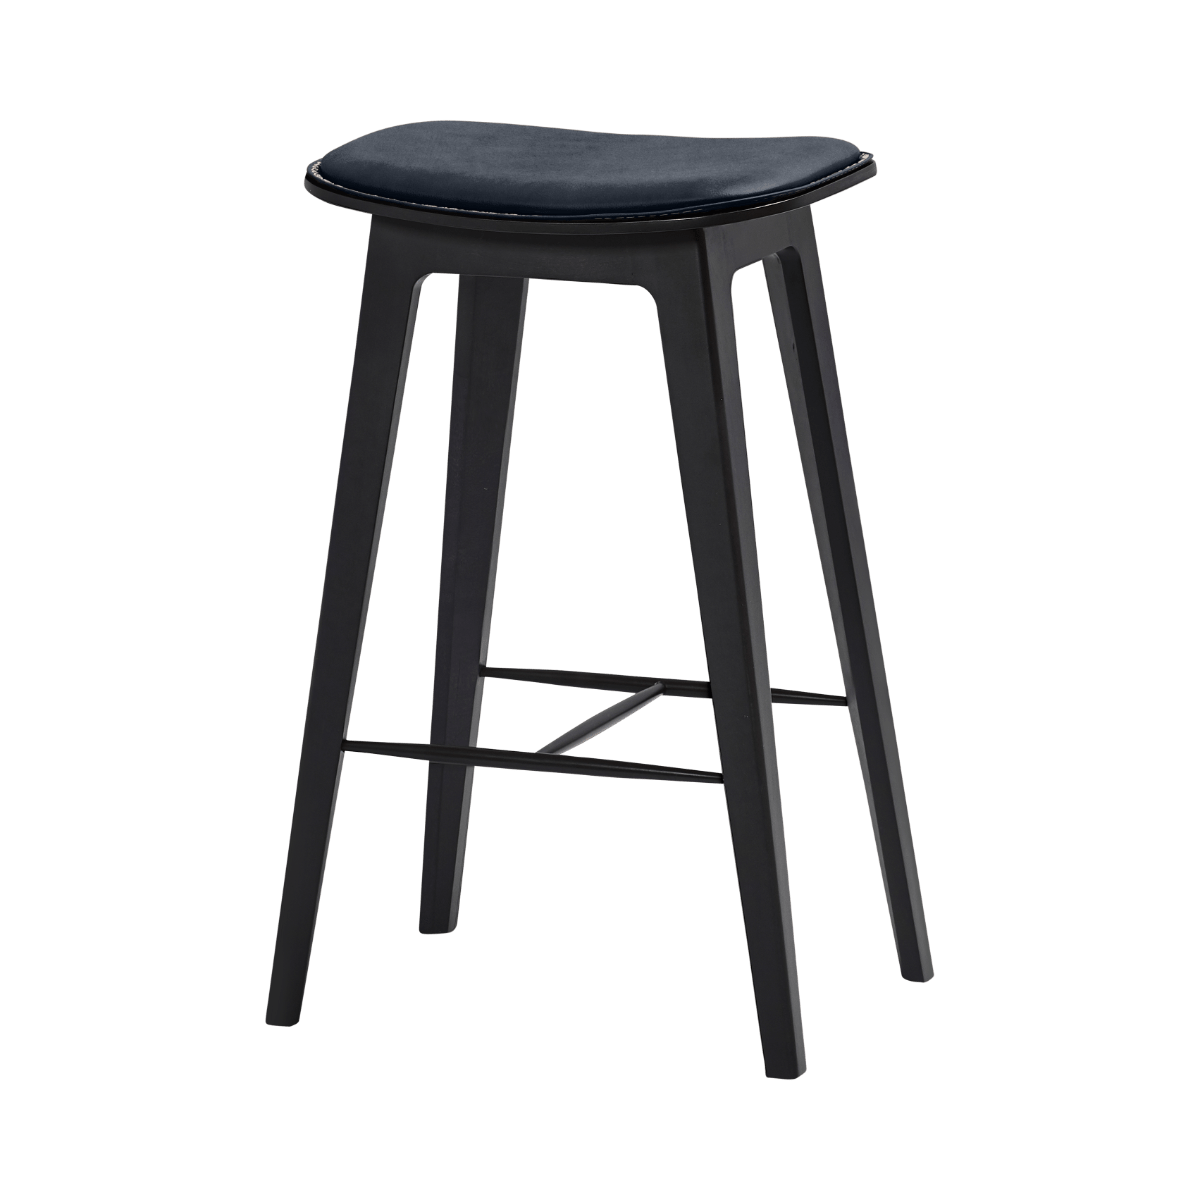 variant_8594309% | Nordic Bar Stool - Beech with stitches [Contract] - 68 cm Luna Carbon | SACKit